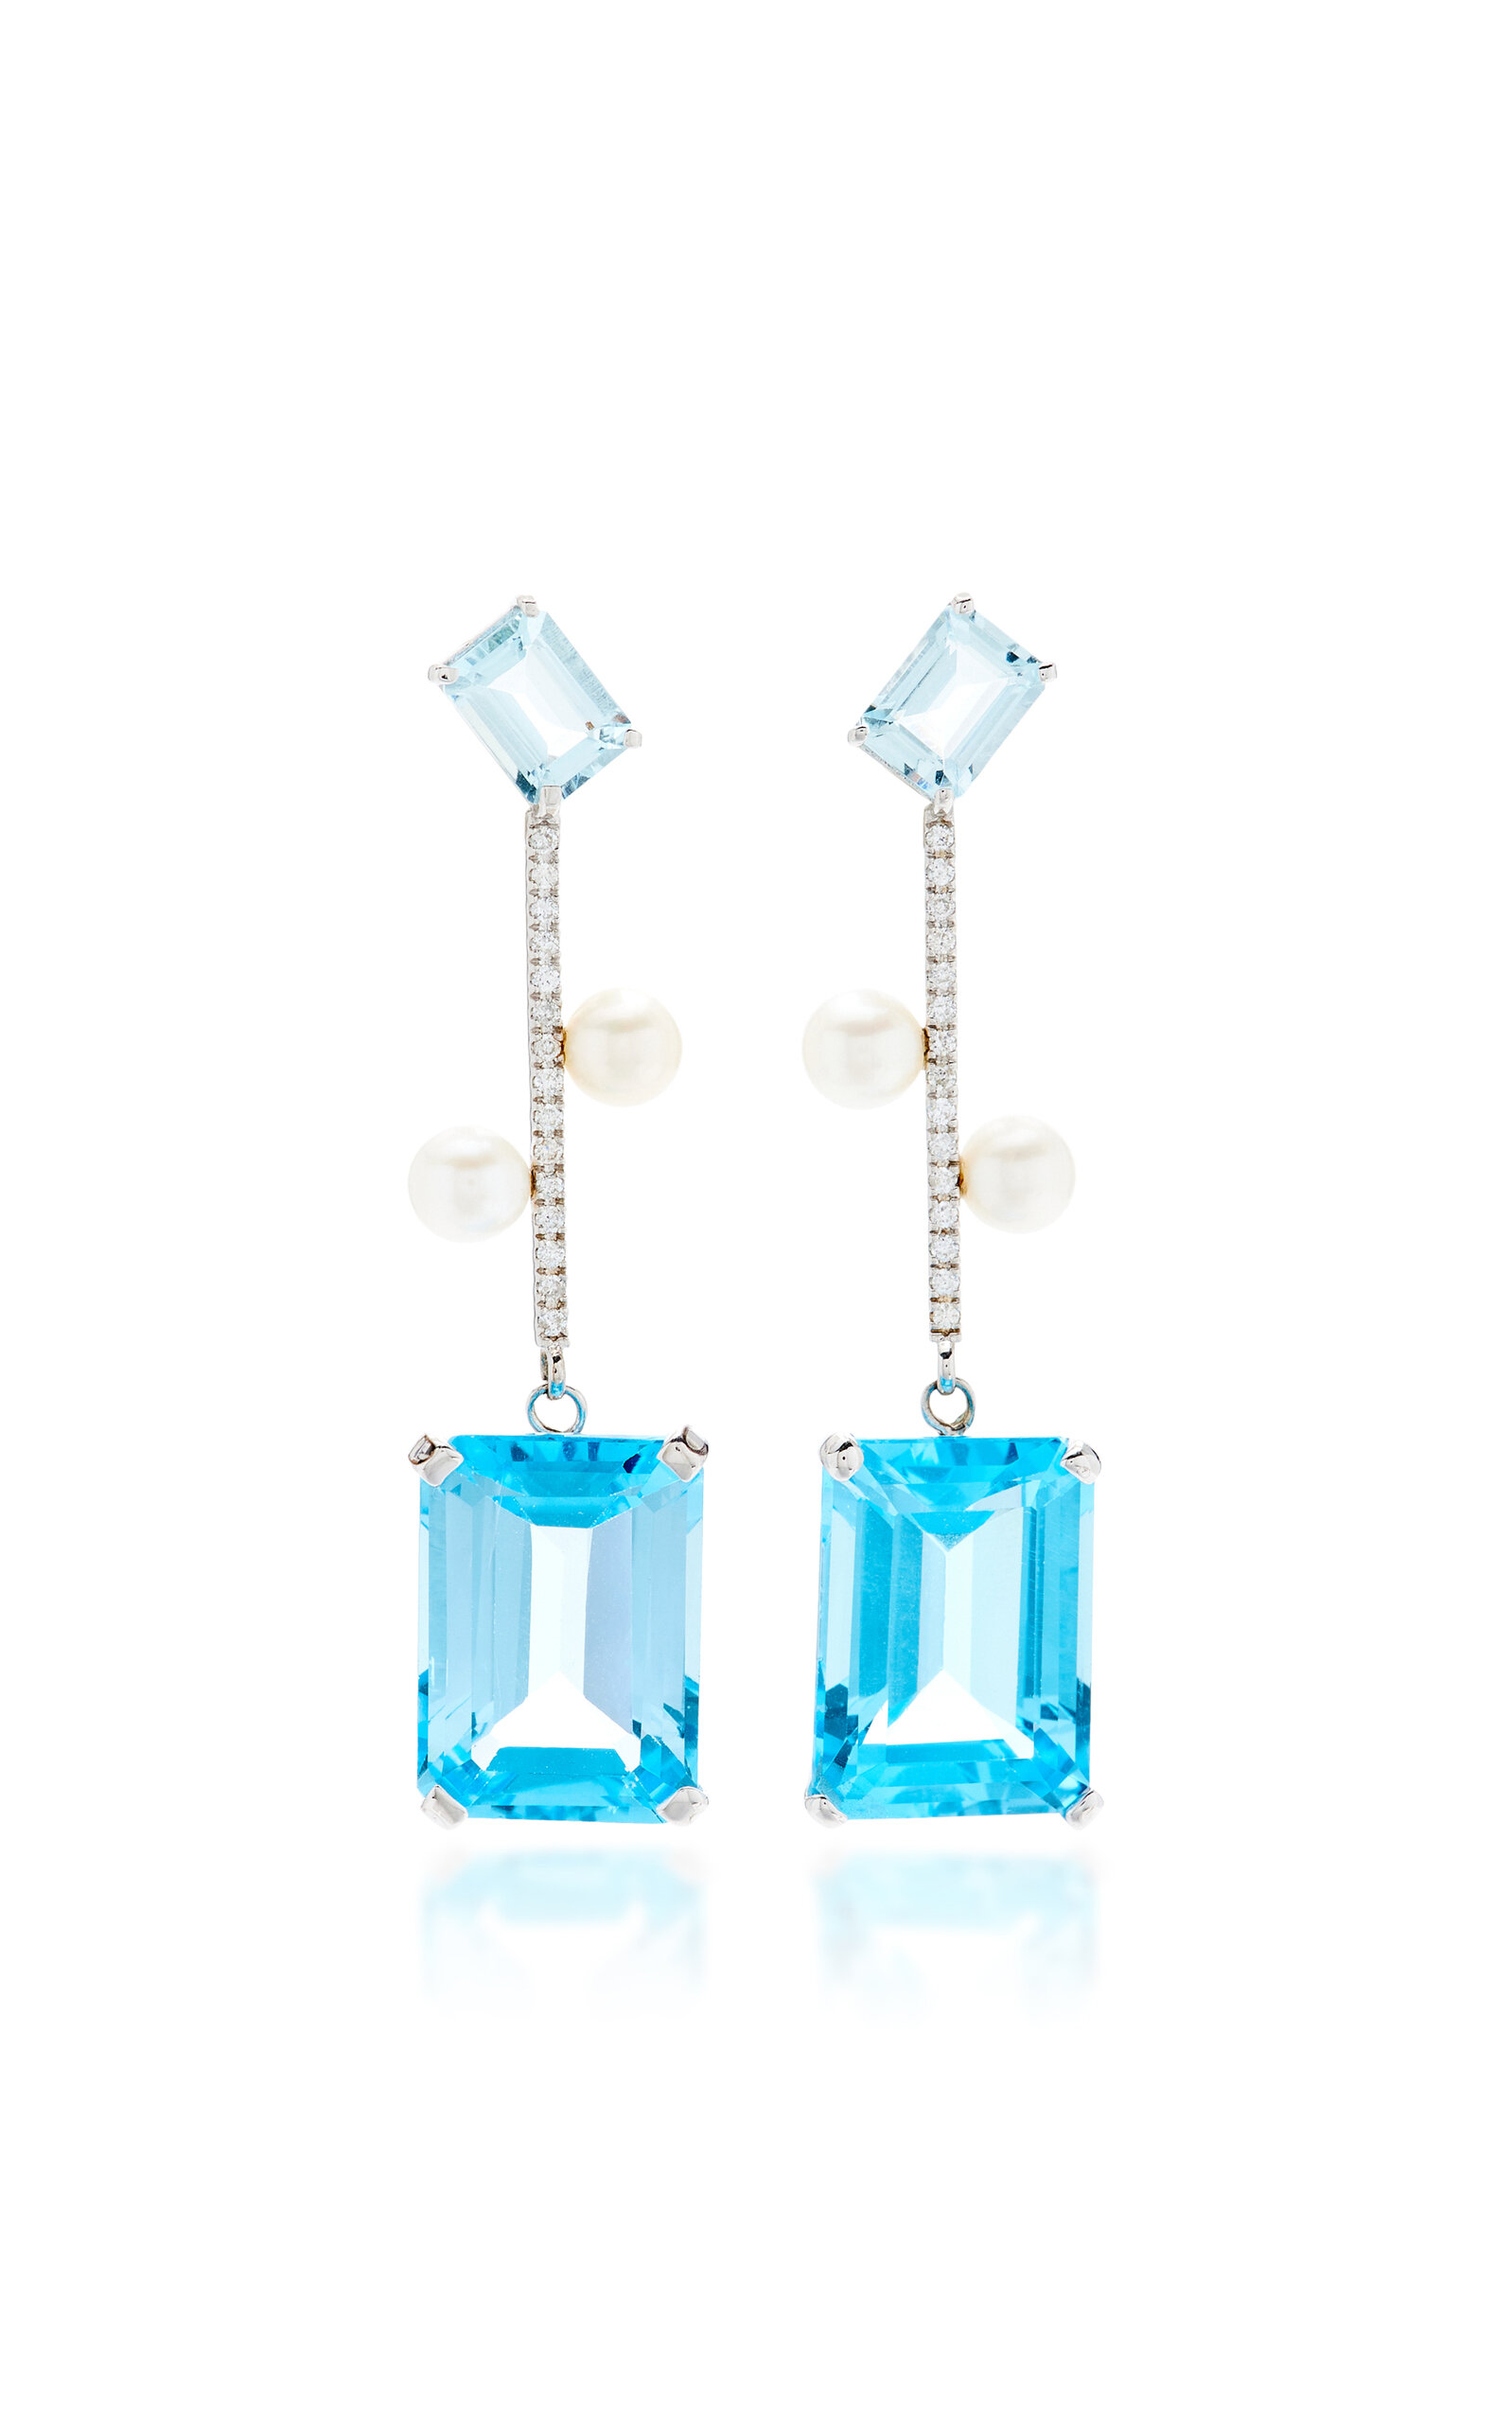 Mateo 14k Yellow Gold Aquamarine; Topaz And Pearl Earrings In Blue